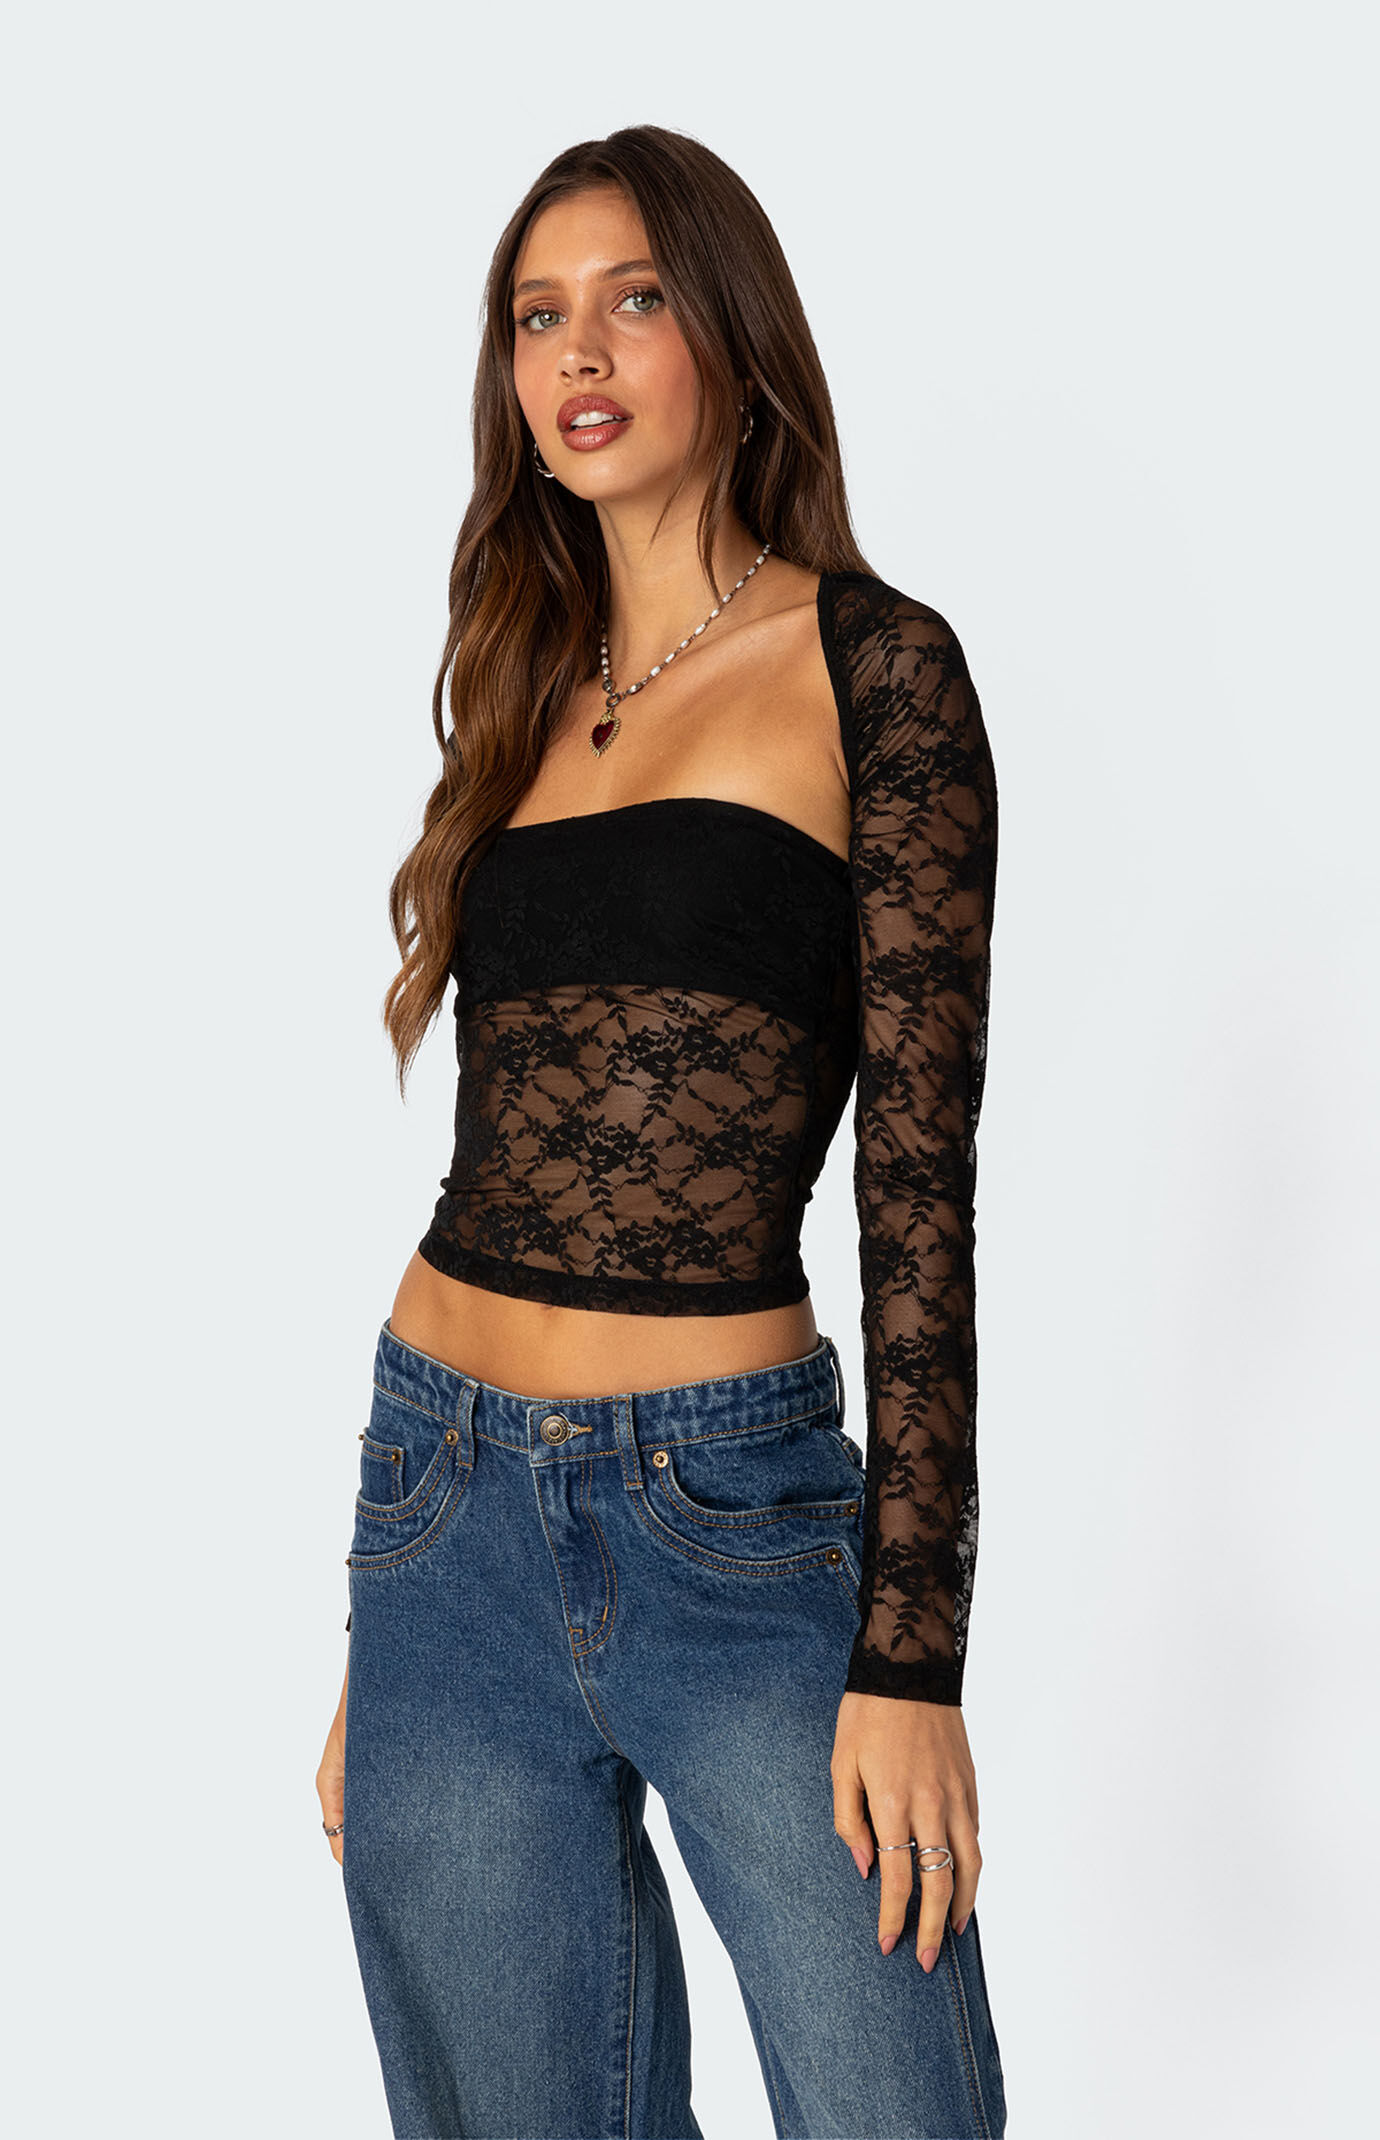 Edikted Addison Sheer Lace Tube Top & Shrug Two Piece Set | PacSun